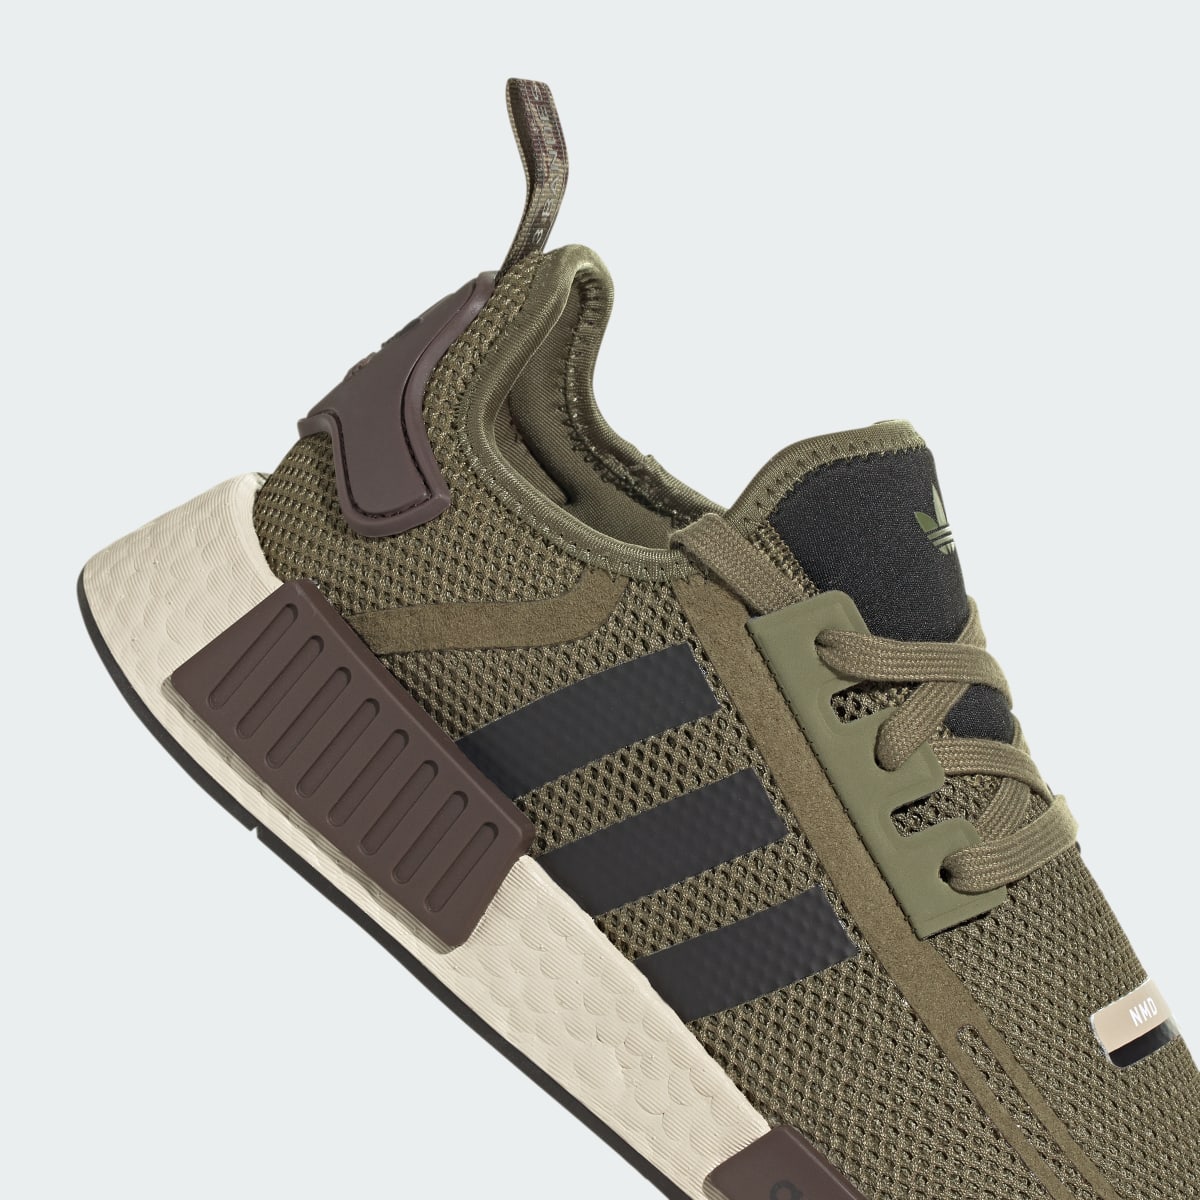 Adidas NMD_R1 Shoes. 12